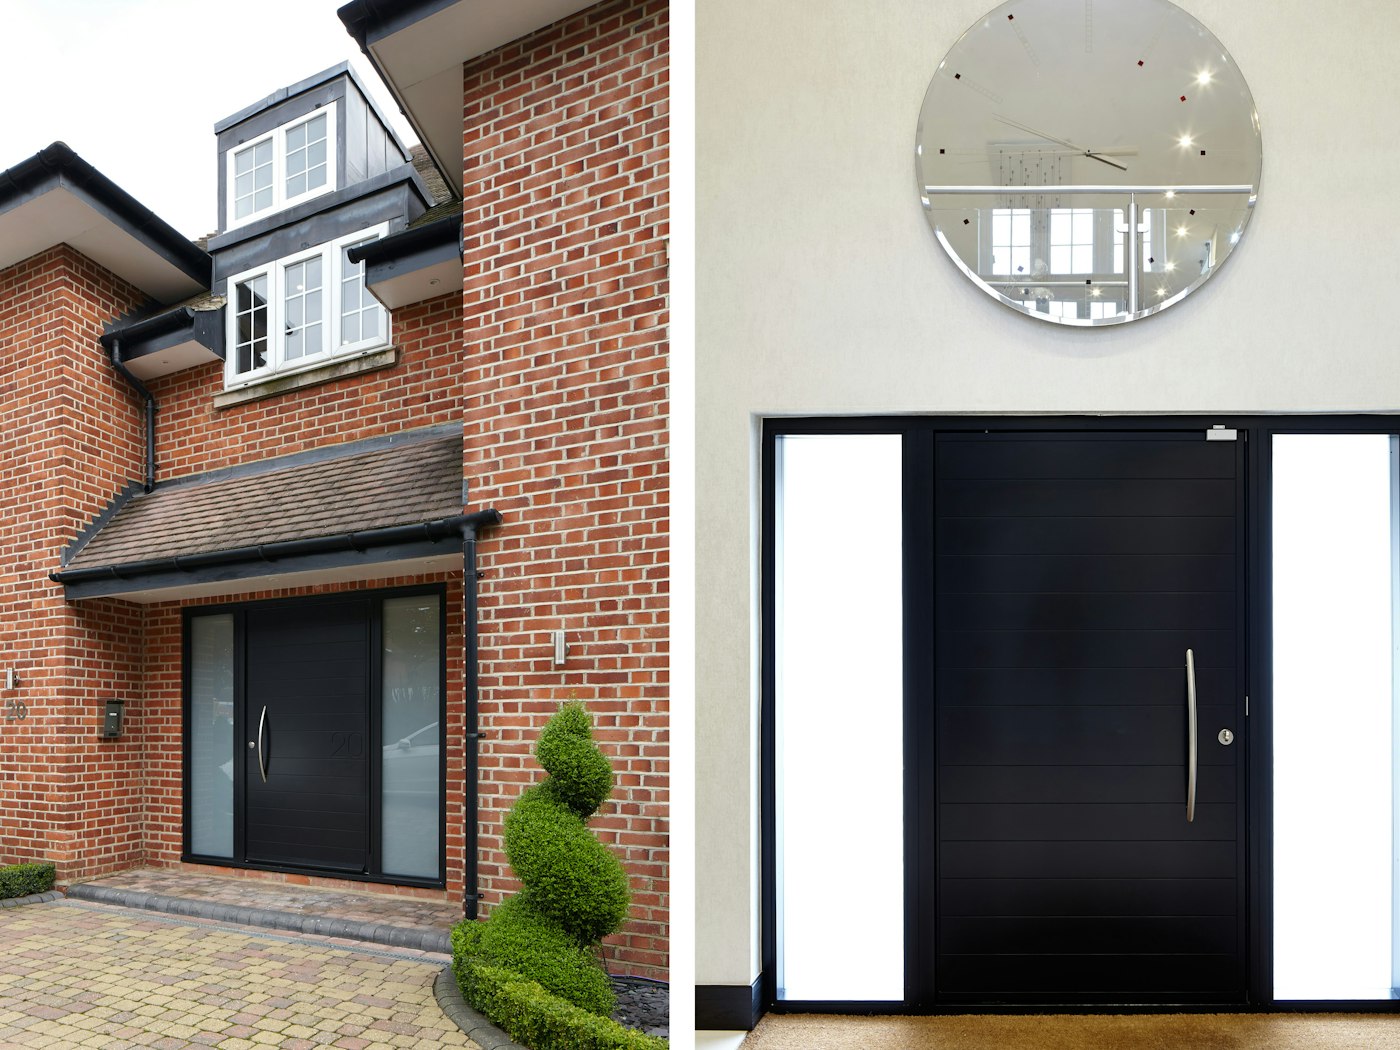 Traditional brick house with Numero black front door